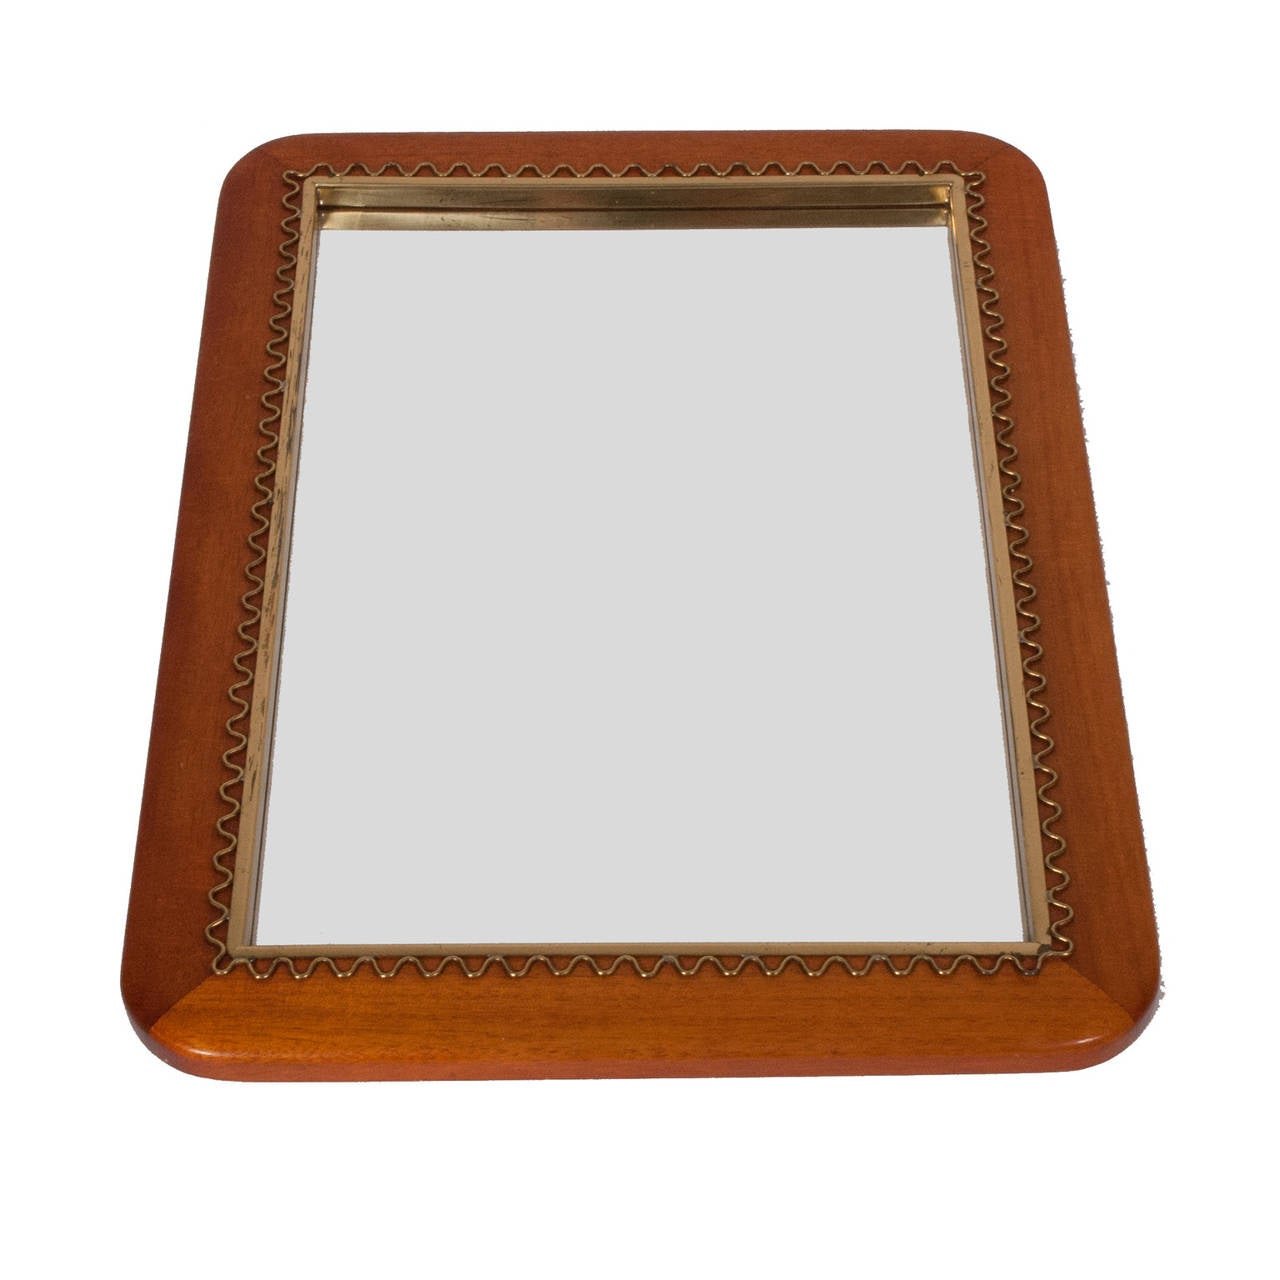 Large solid mahogany mirror with brass accents. Can be hung on the wall or as a tabletop mirror.